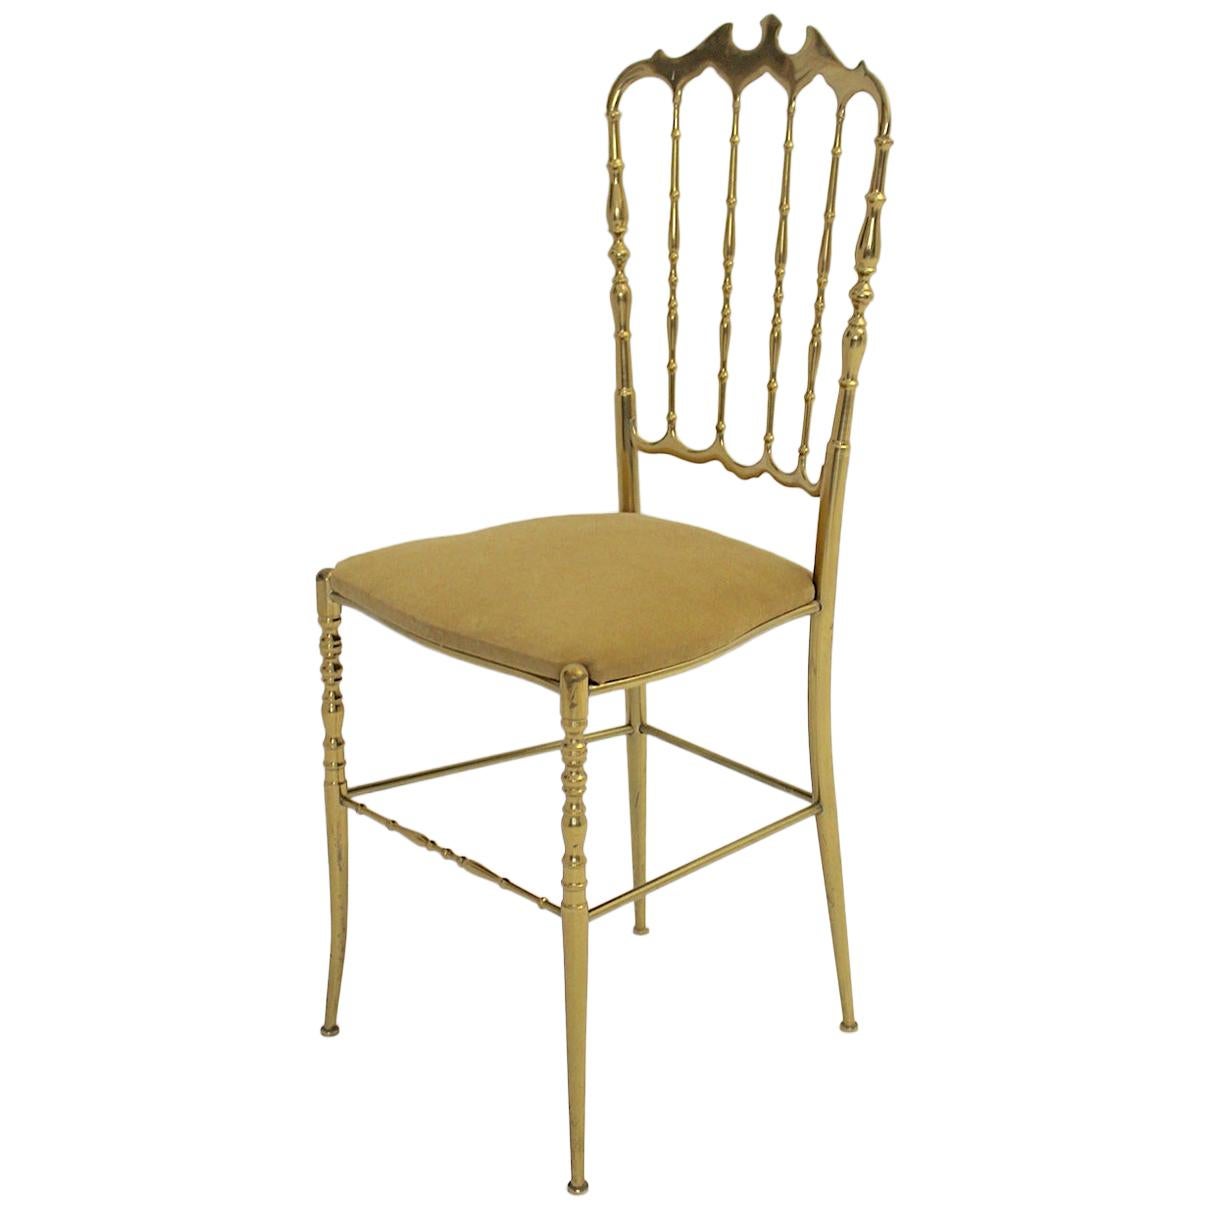 Mid-Century Modern Vintage Chiavari Brass Side Chair or Chair, 1950s, Italy For Sale